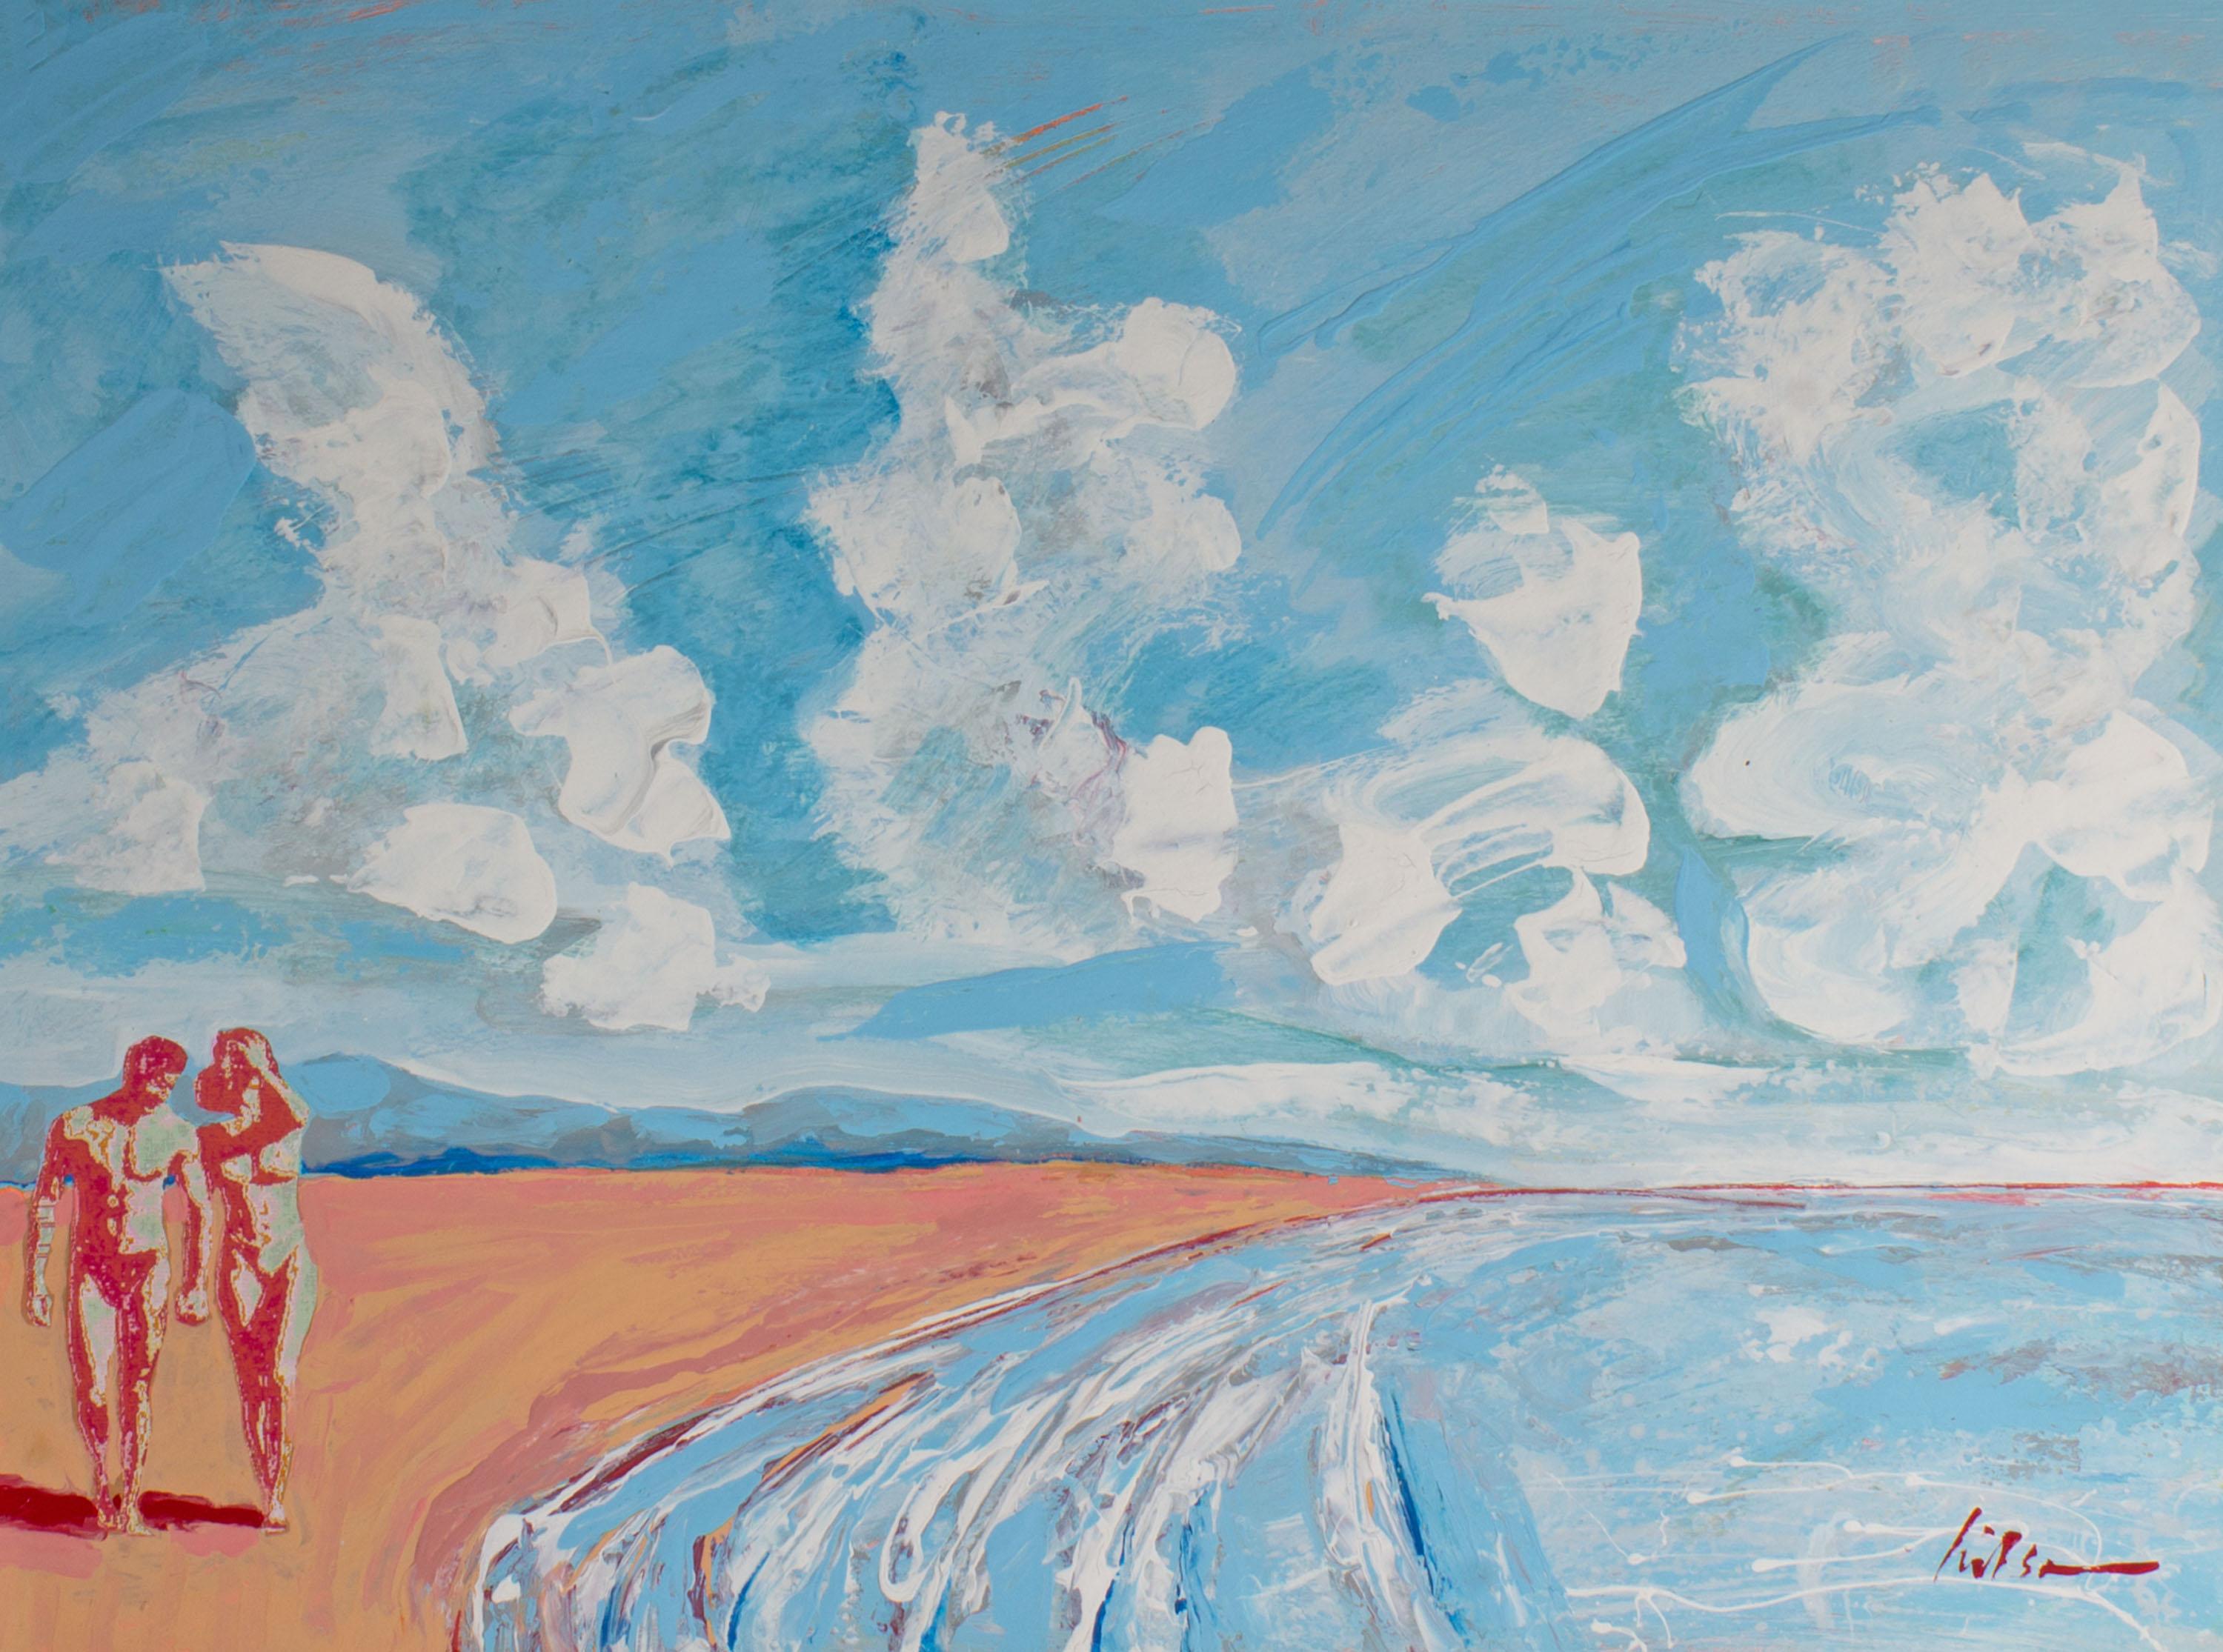 A 1990s abstract acrylic and collage on paper beach landscape painting by American artist Harry Hilson (1935-2004). Gestural lines come together to create a blue and pink abstract shoreline. A cloudy blue sky is in the background. Two nude figures